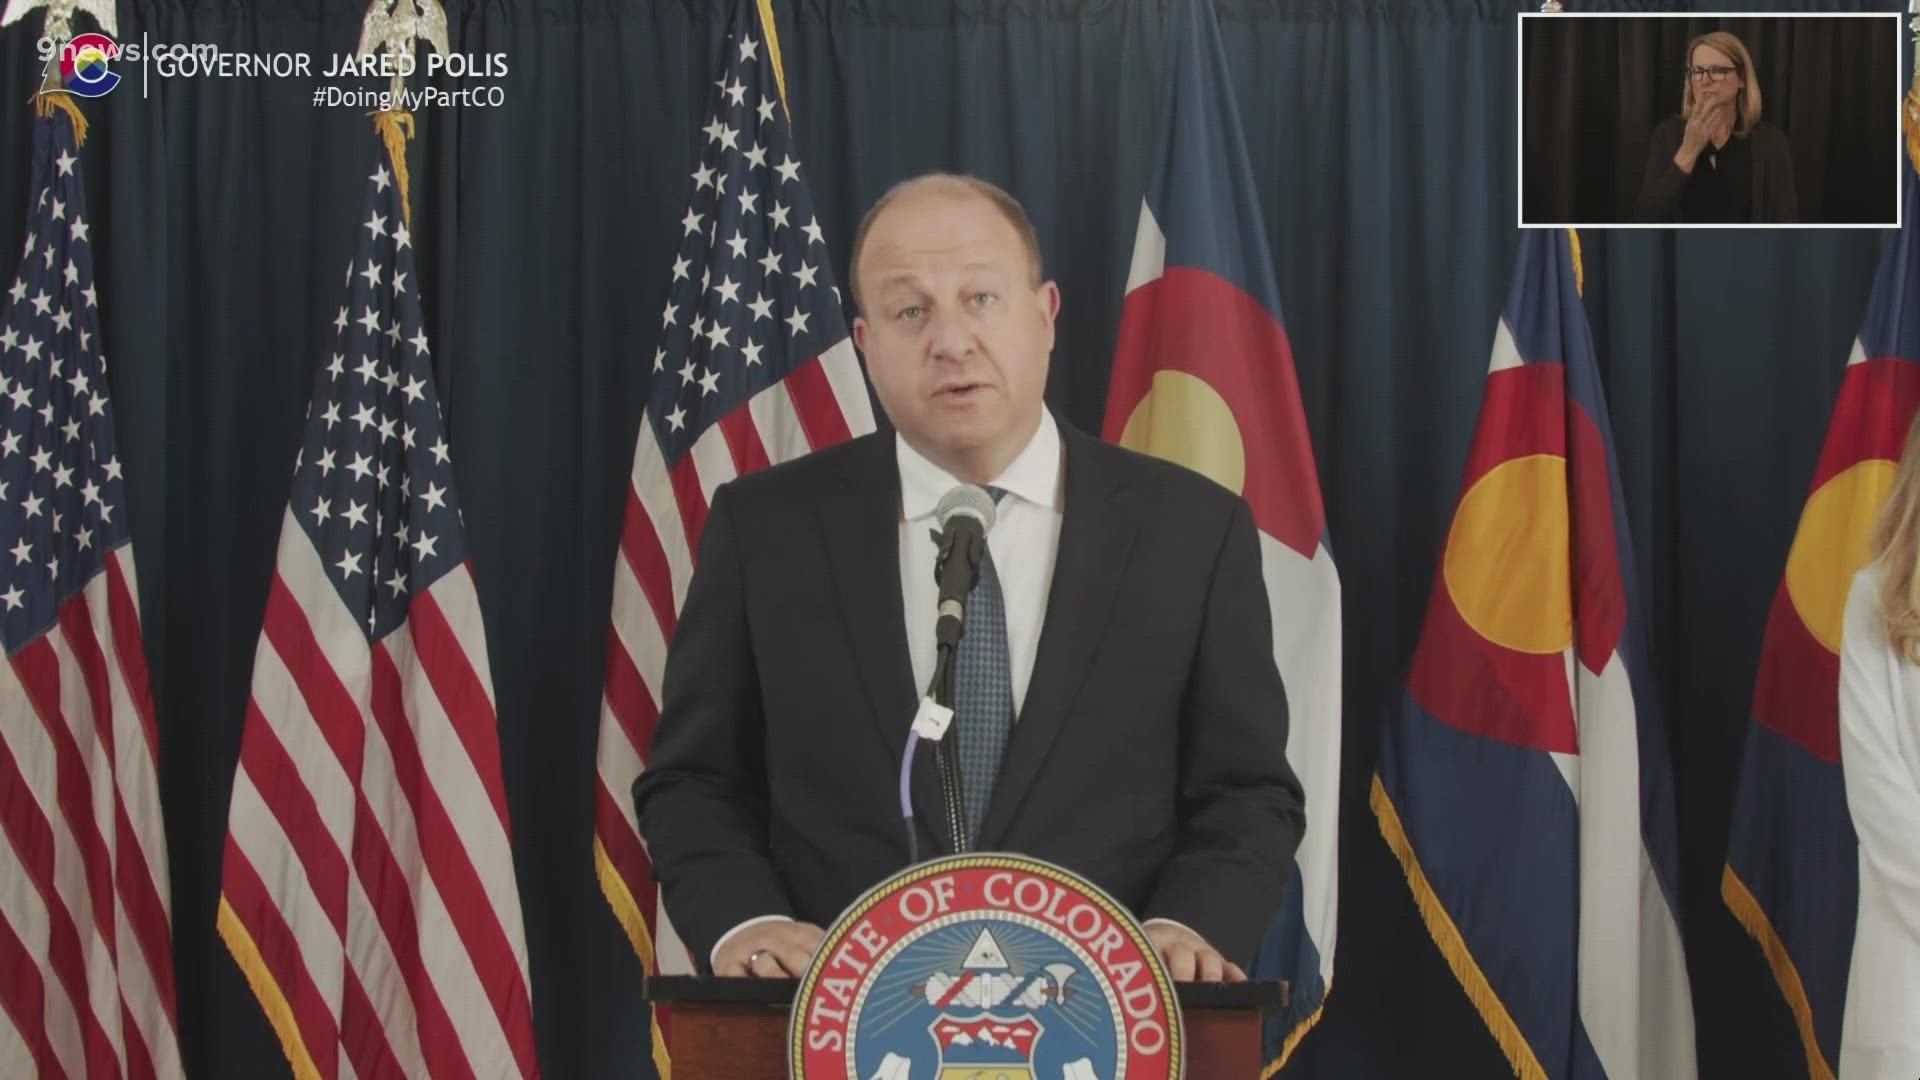 Gov. Jared Polis holds a news conference on the COVID-19 pandemic in Colorado on April 20, 2021.